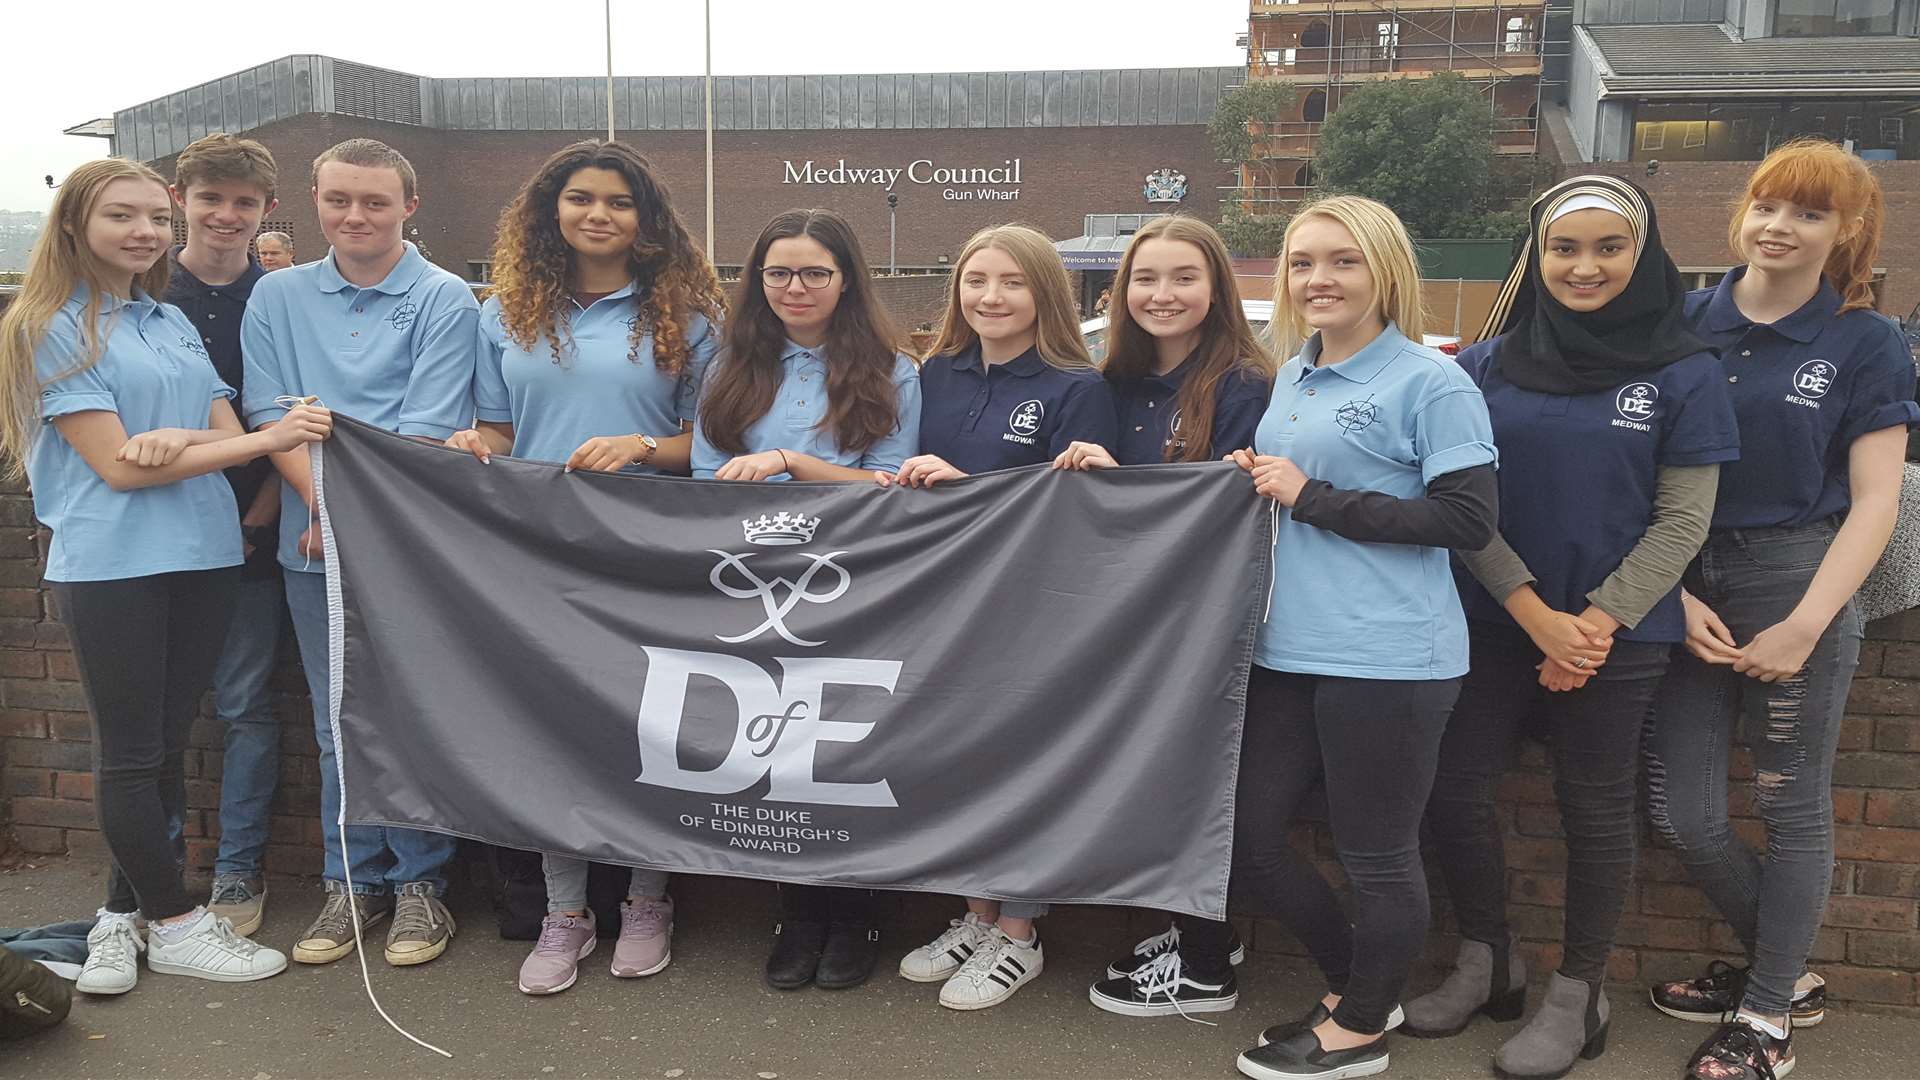 The Medway DofE Youth Panel before the cabinet meeting